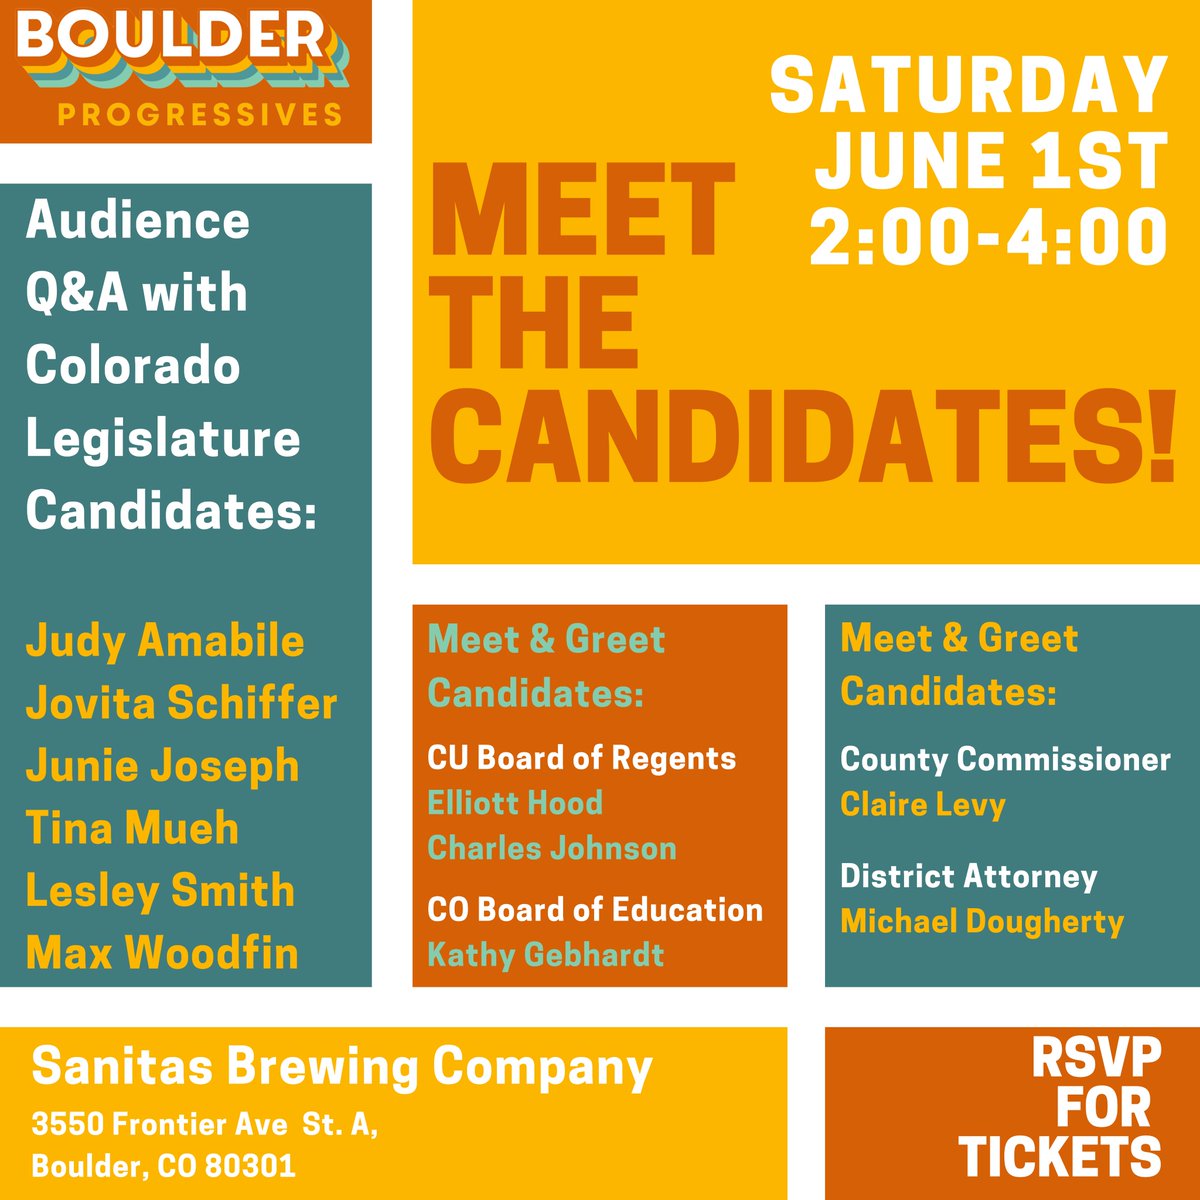 Do you have your tickets yet, Boulder?
June 1st
Candidate Meet-and-Greet and Q&A!

Tickets are limited, RSVP now: actionnetwork.org/events/boulder…

#Boulder #coleg
@JudyAmabileCO
@LesleyForCU
@max_woodfin
@Jovita4Colorado
@Junie4Colorado
@elliottvhood
@CJ4CU
@DAdoughertyCO
@GebhardtforCO